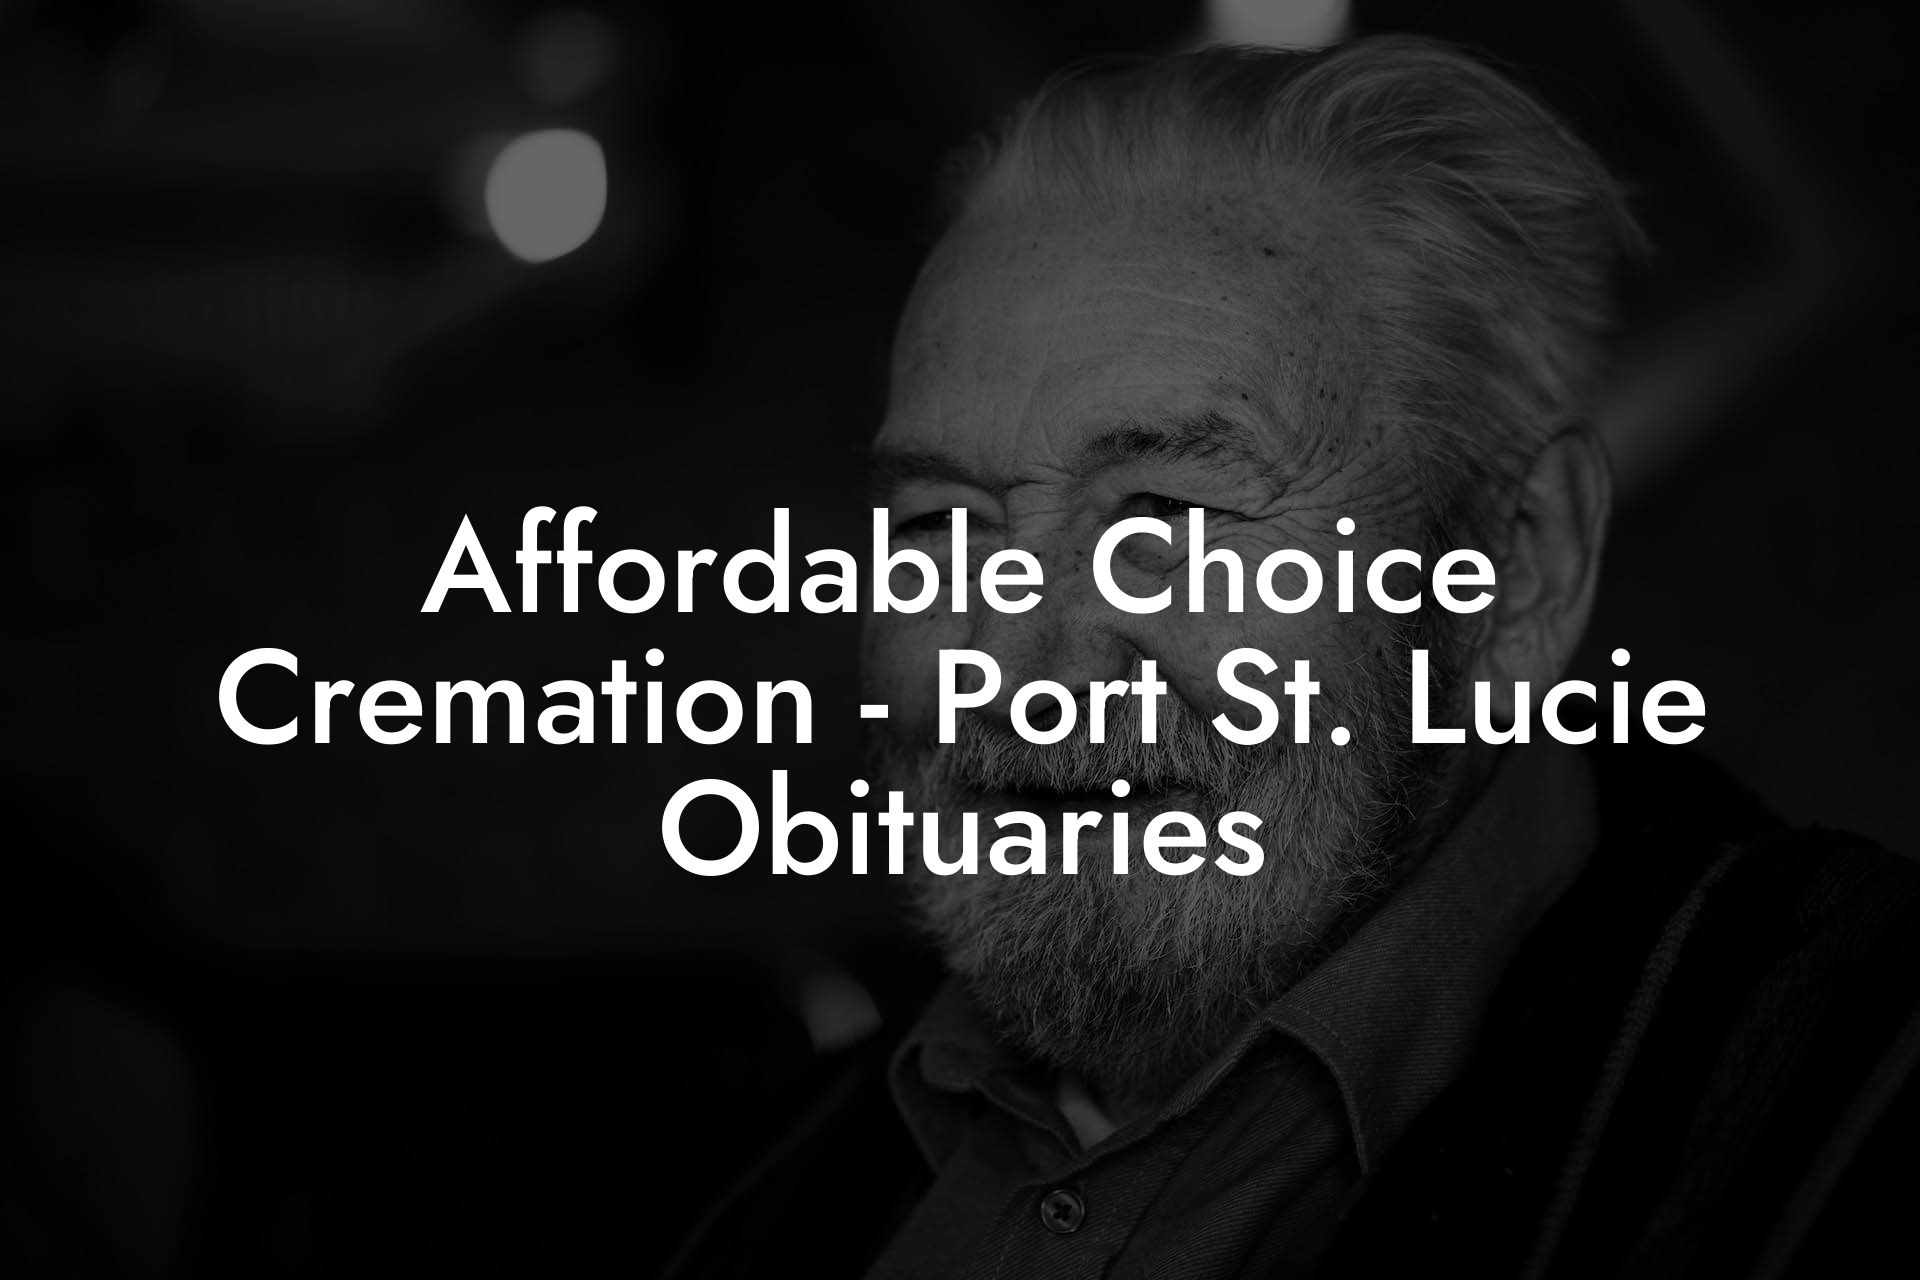 Affordable Choice Cremation - Port St. Lucie Obituaries